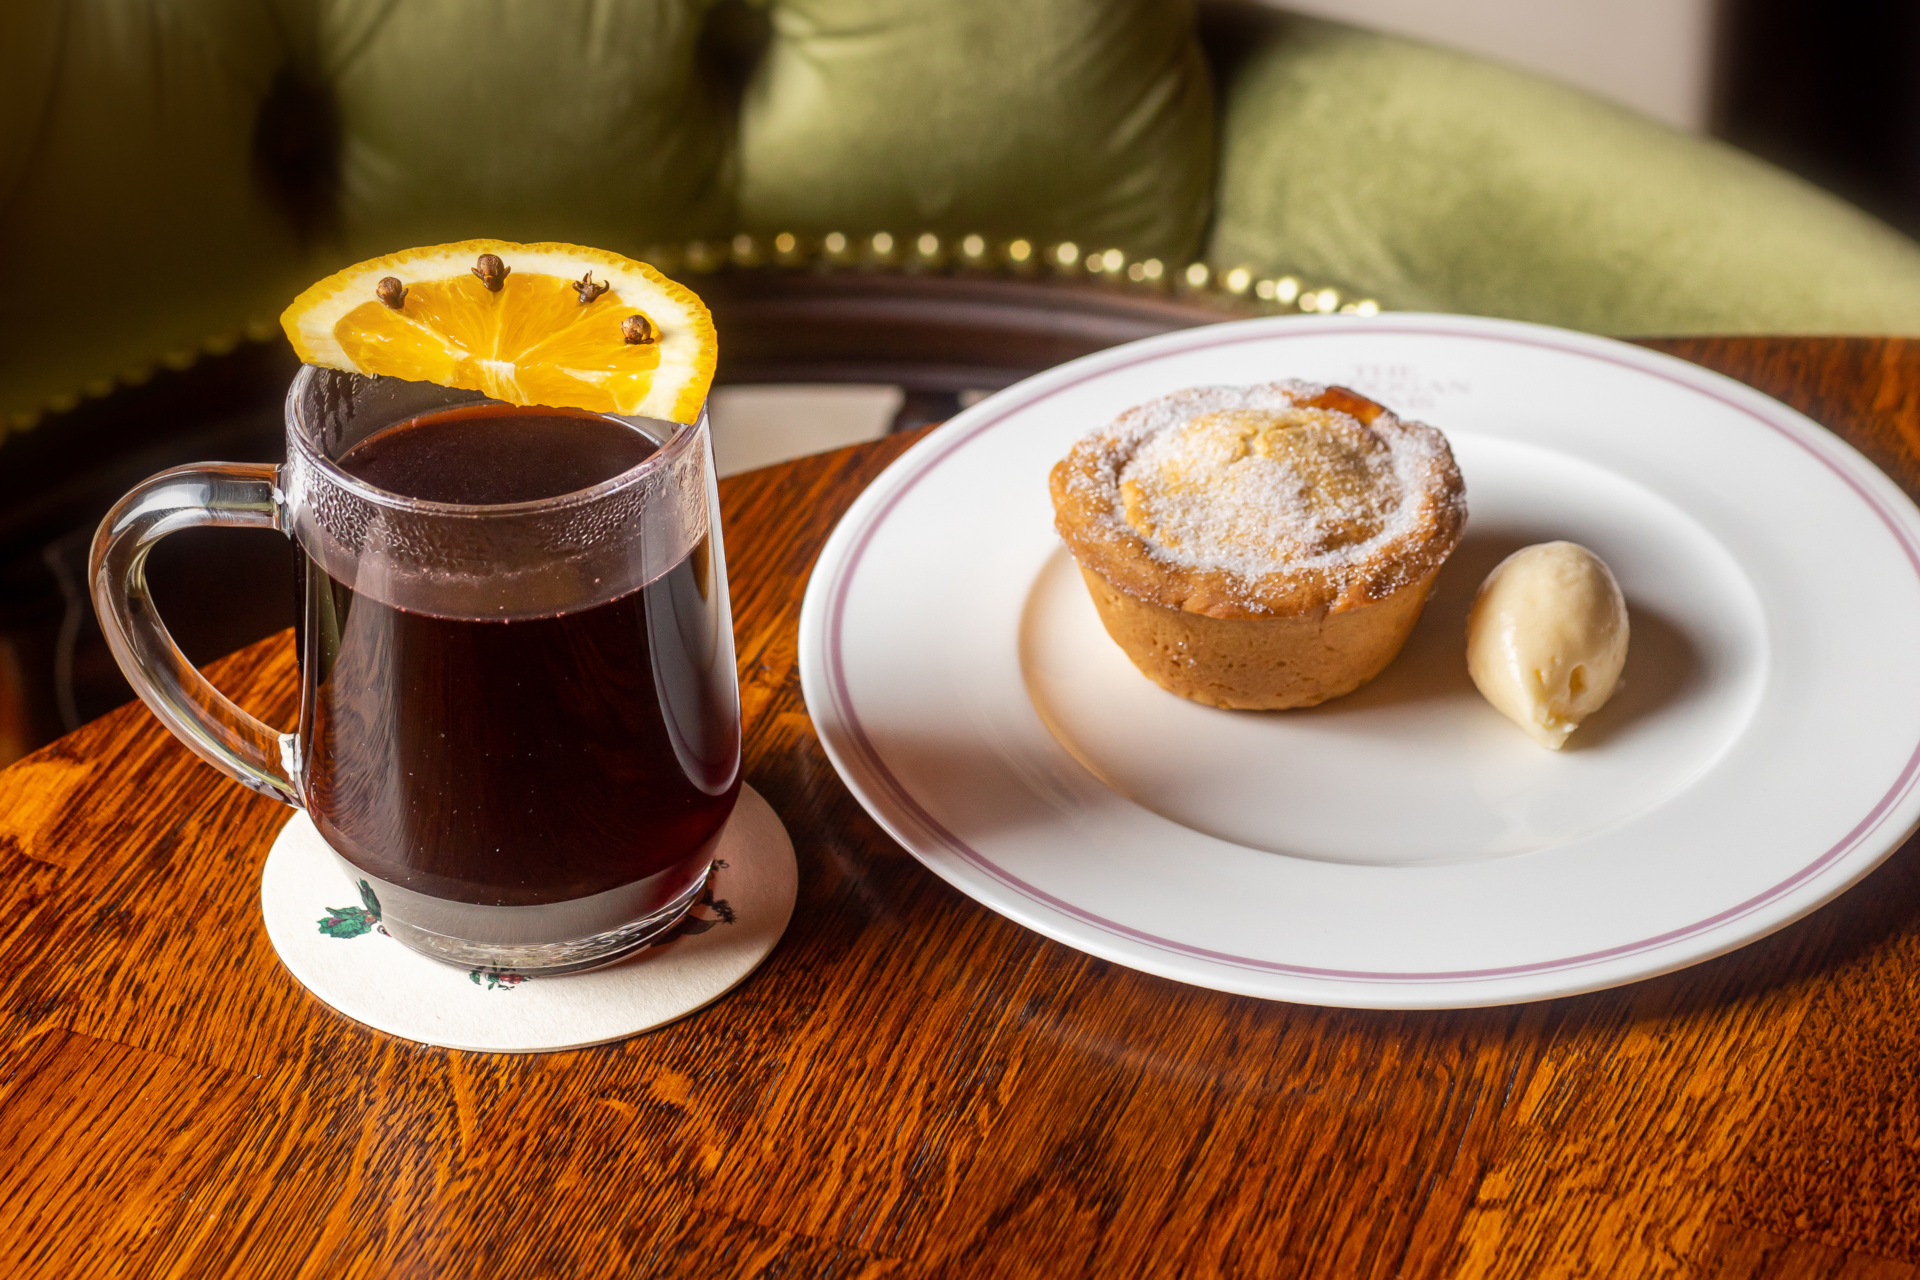 Mulled wine and mince pies